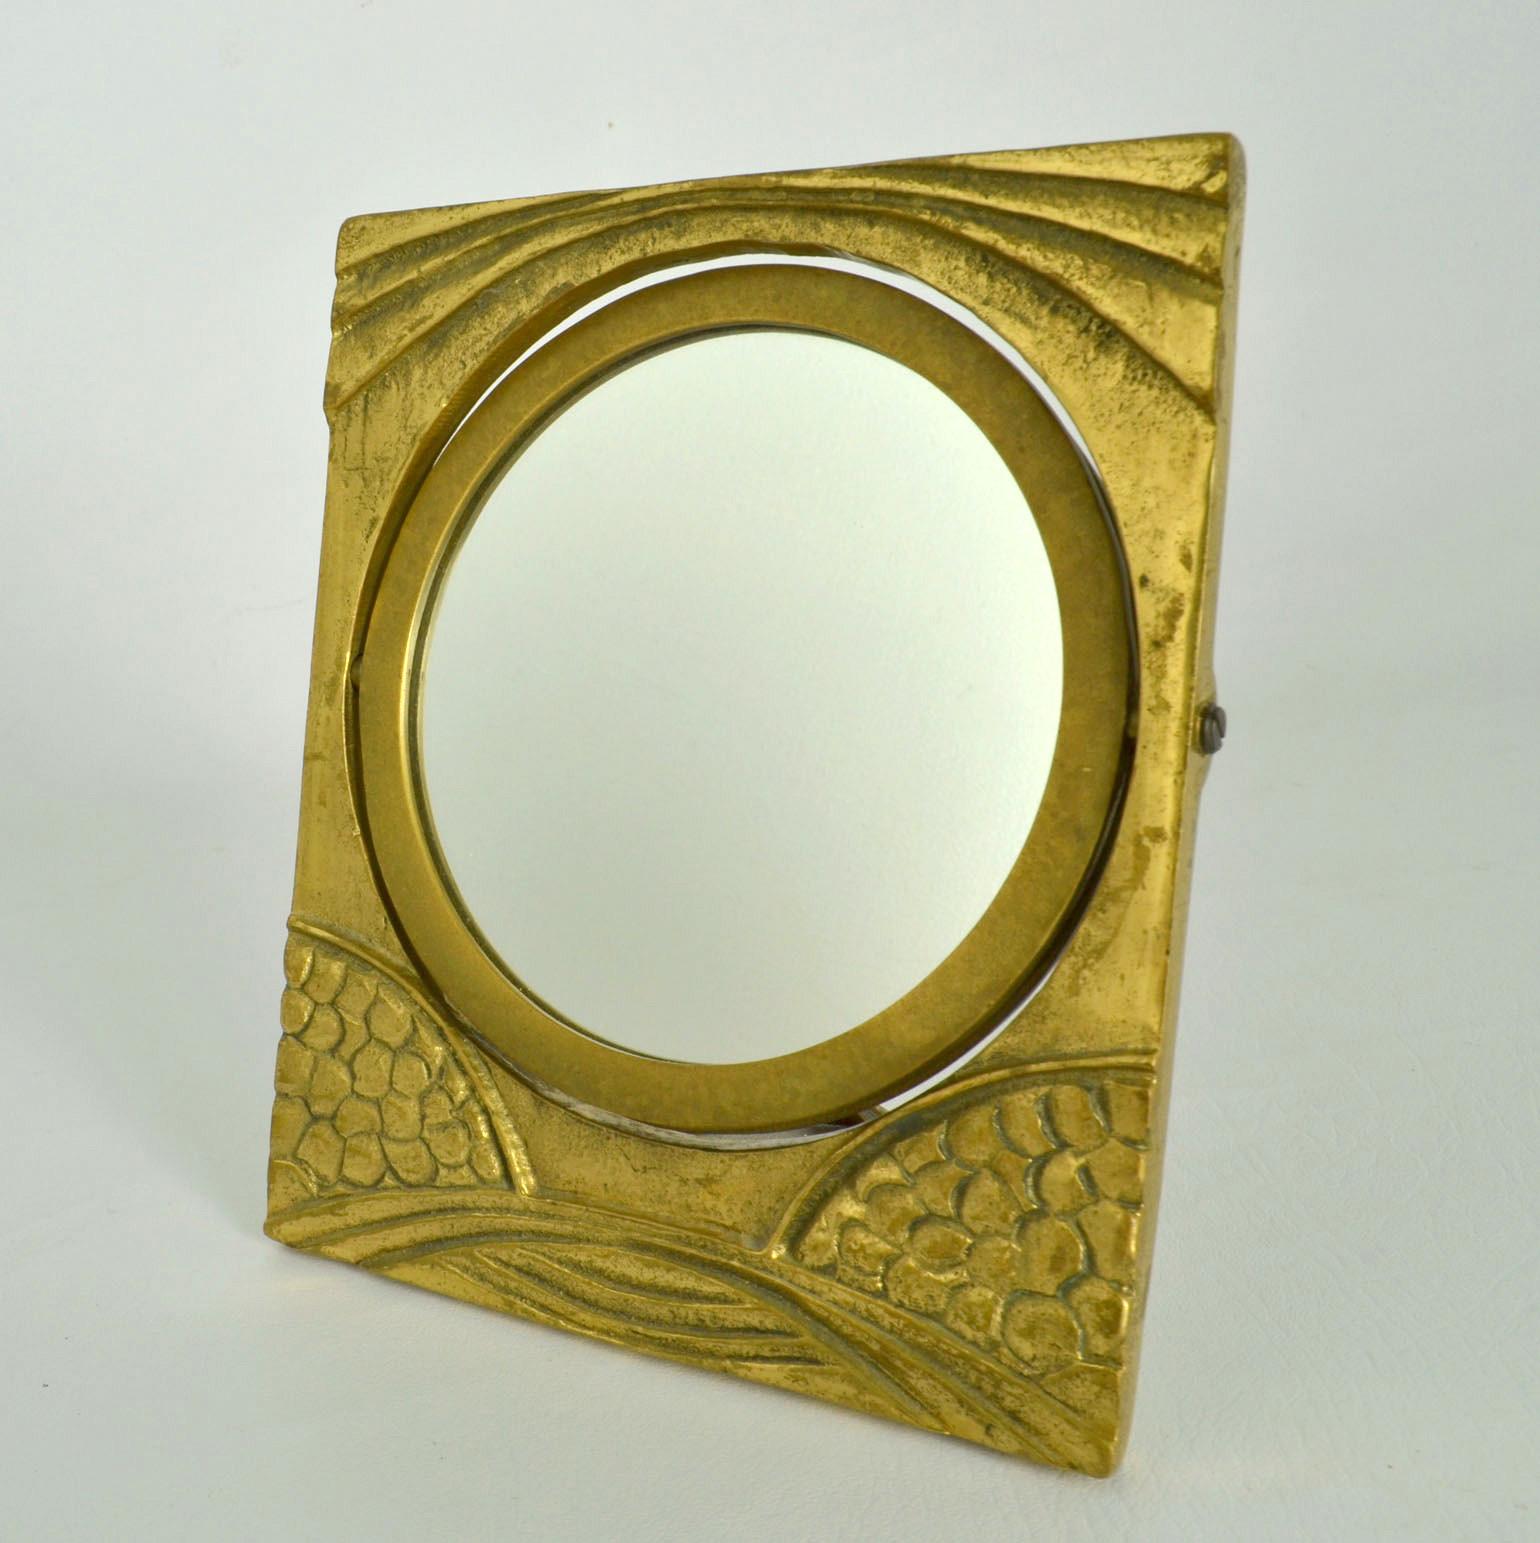 Organic table mirror pivots into a picture frame by touch. The bronze has been cast into a relief of natural lines inspired by Art Nouveau depicting a landscape and sunset. The frame and stand are cast in one piece and is angled for an improved